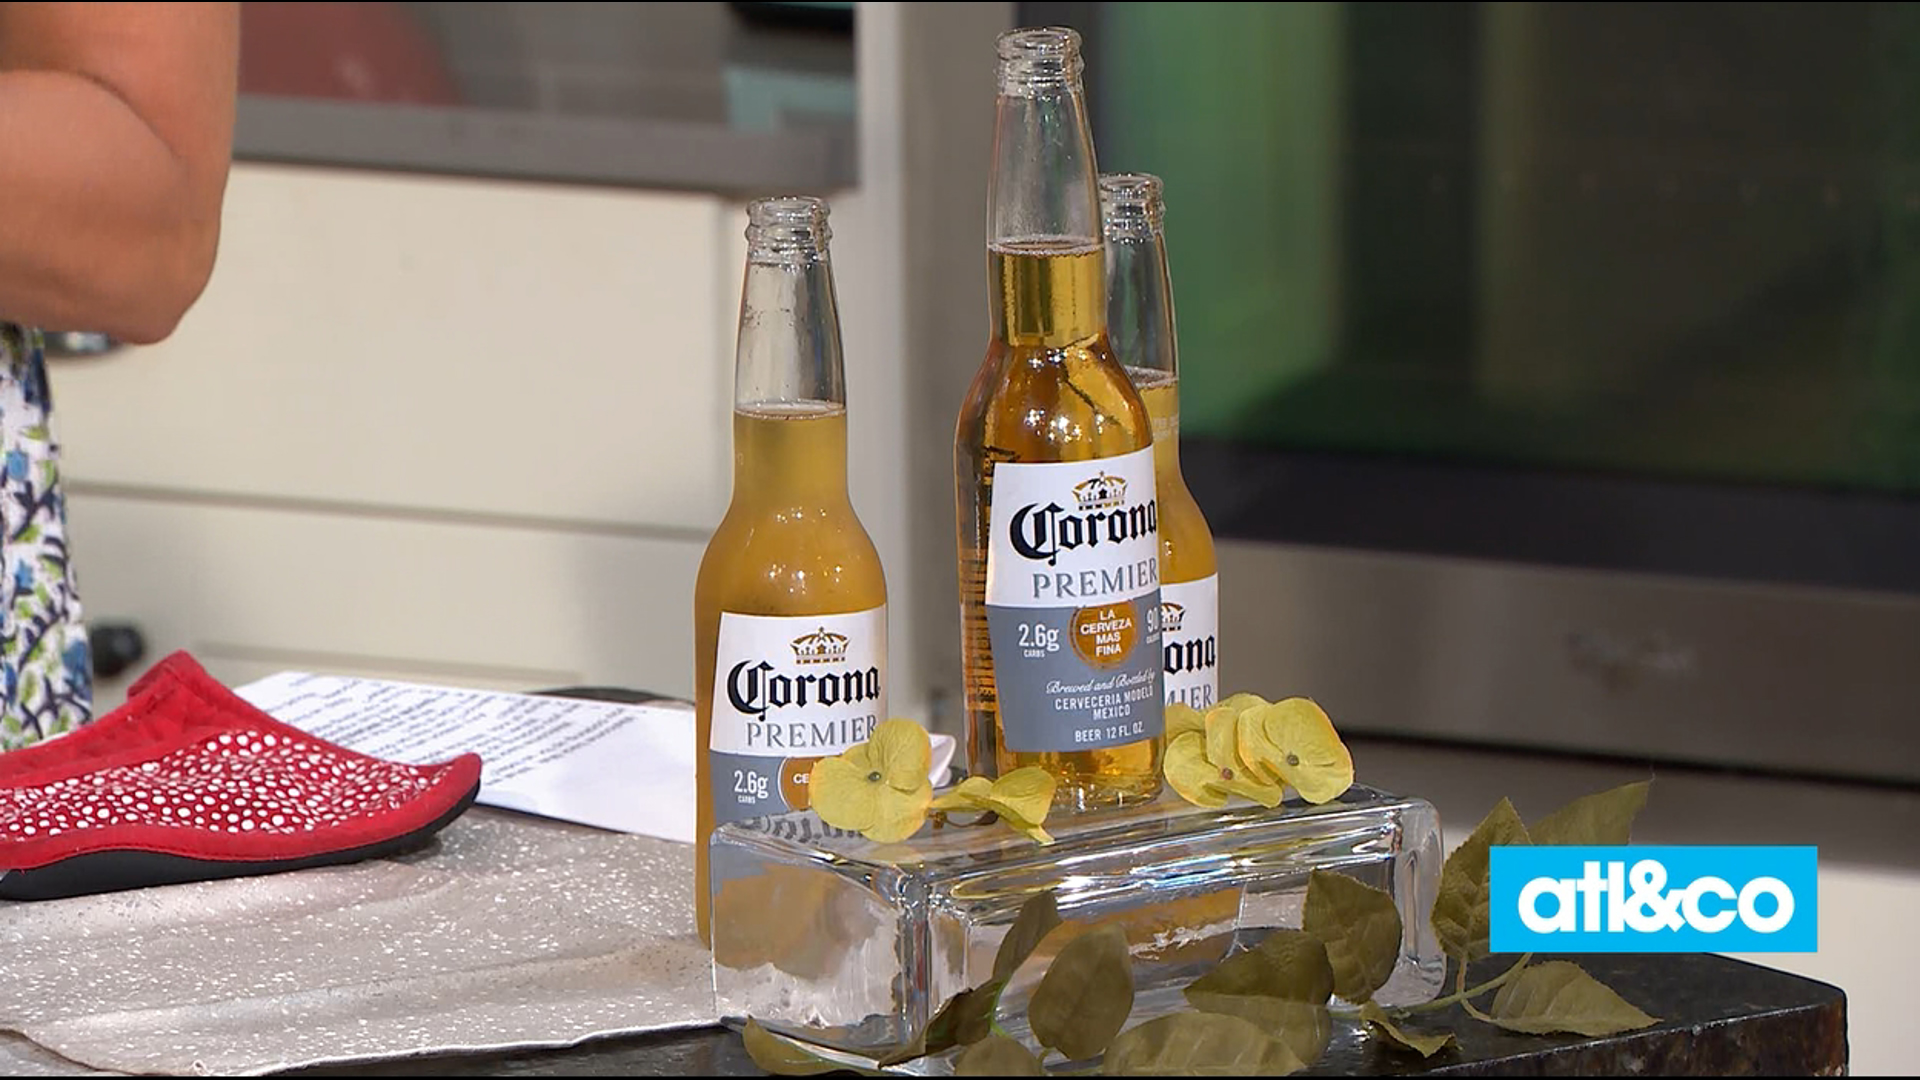 Chef Mali Hunter whips up simple and savory salmon nuggets to pair with a refreshing Corona Premier.